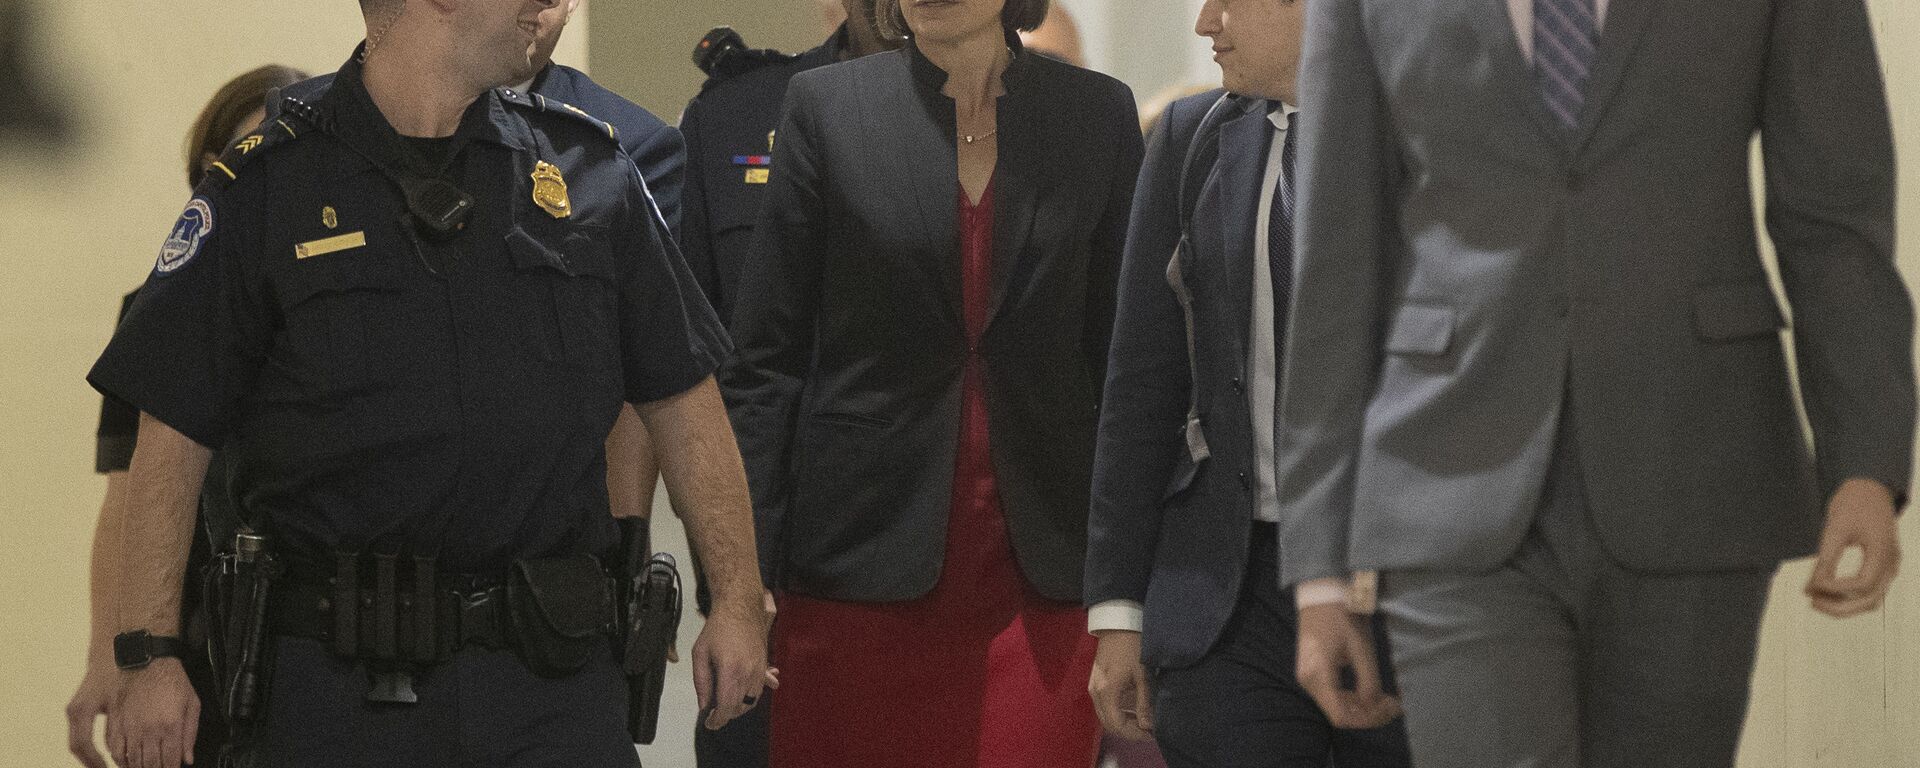 Former White House advisor on Russia, Fiona Hill, leaves Capitol Hill in Washington, Monday, Oct. 14, 2019, after testifying before congressional lawmakers as part of the House impeachment inquiry into President Donald Trump. (AP Photo/Manuel Balce Ceneta) - Sputnik International, 1920, 05.10.2021